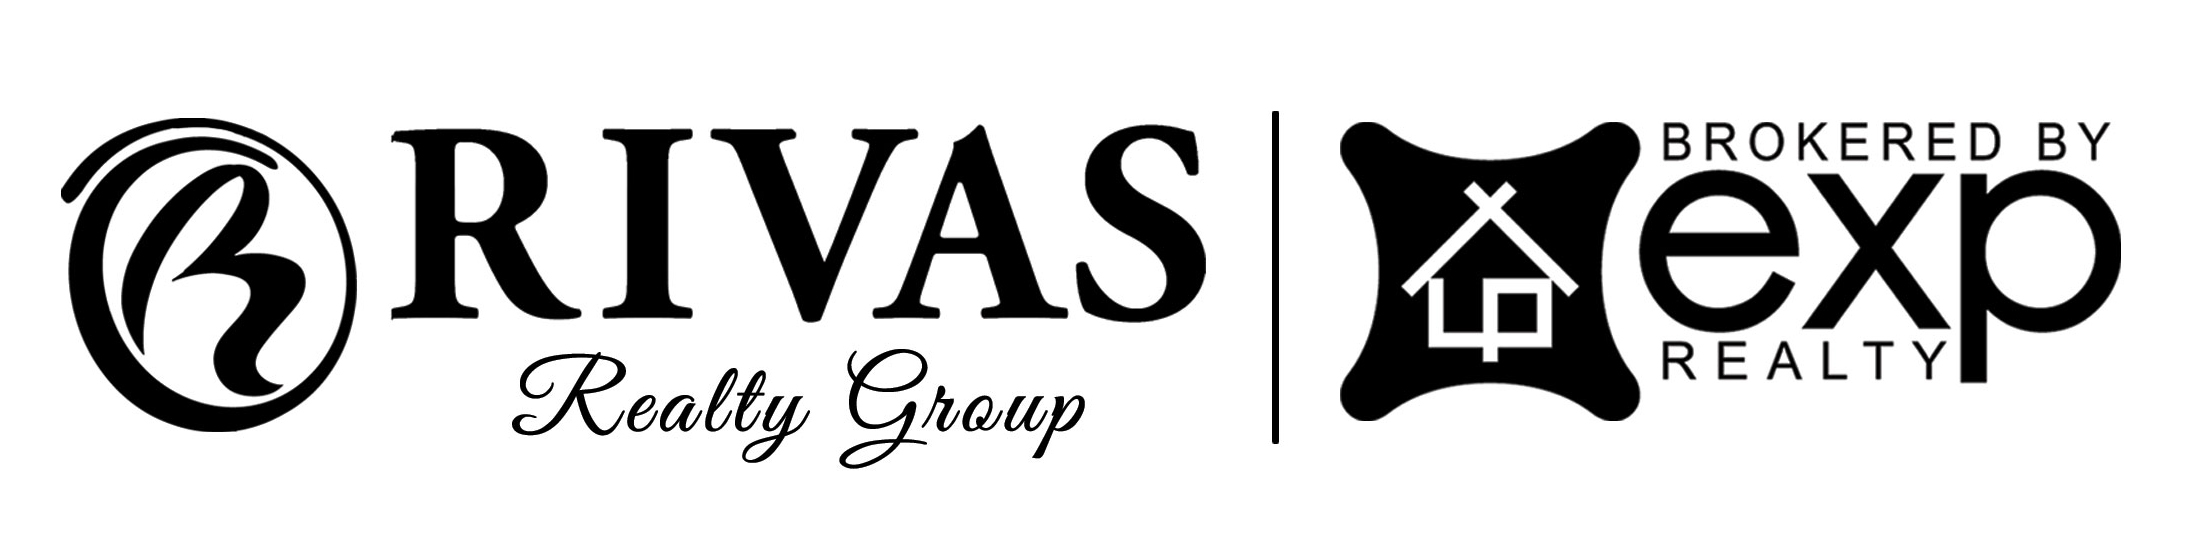 The Rivas Group | Brokered by eXp Realty